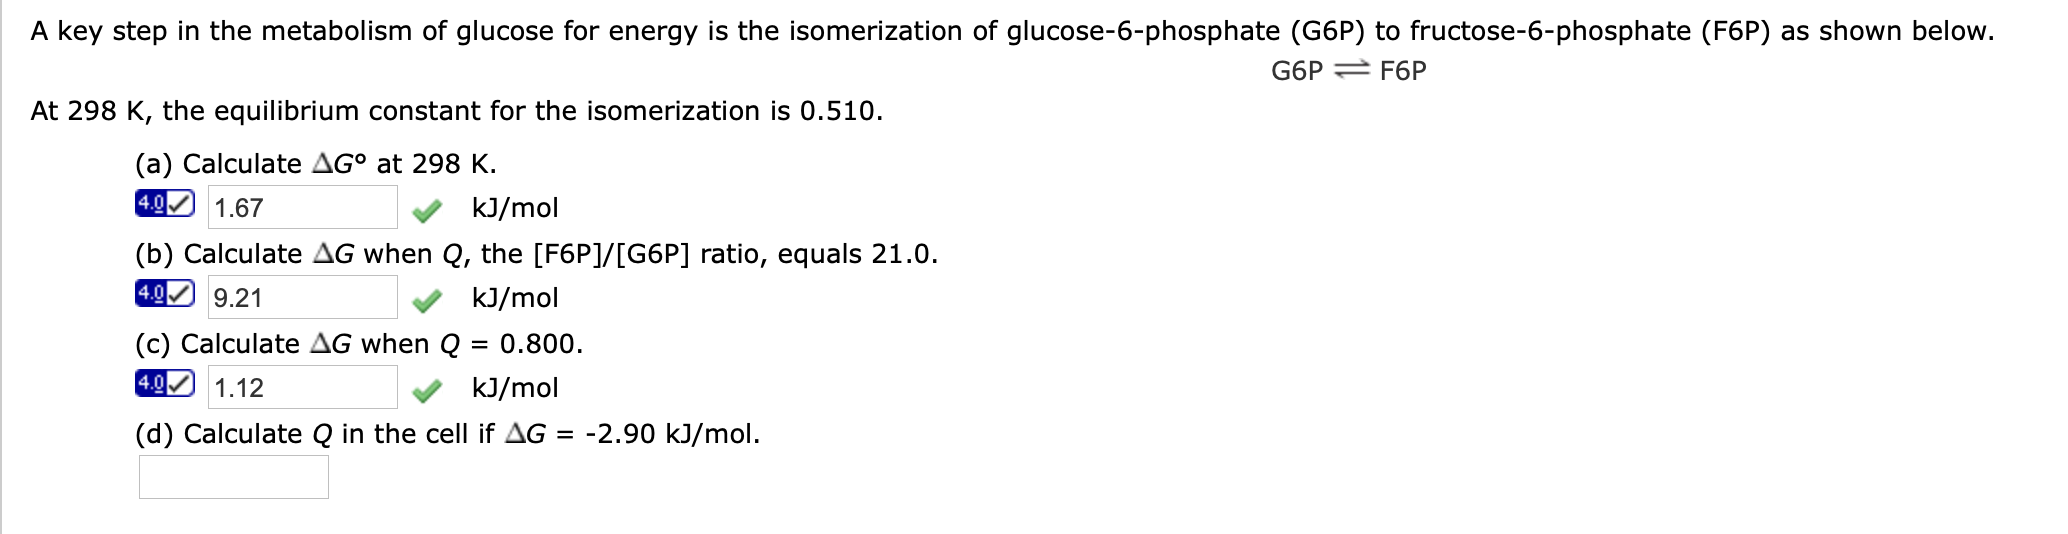 A key step in the metabolism of glucose for energy is the isomerization of glucose-6-phosphate (G6P) to fructose-6-phosphate (F6P) as shown below.
G6P 2 F6P
At 298 K, the equilibrium constant for the isomerization is 0.510.
(a) Calculate AG° at 298 K.
4.0 1.67
kJ/mol
(b) Calculate AG when Q, the [F6P]/[G6P] ratio, equals 21.0.
4.0
9.21
kJ/mol
(c) Calculate AG when Q = 0.800.
4.0
1.12
kJ/mol
(d) Calculate Q in the cell if AG = -2.90 kJ/mol.
